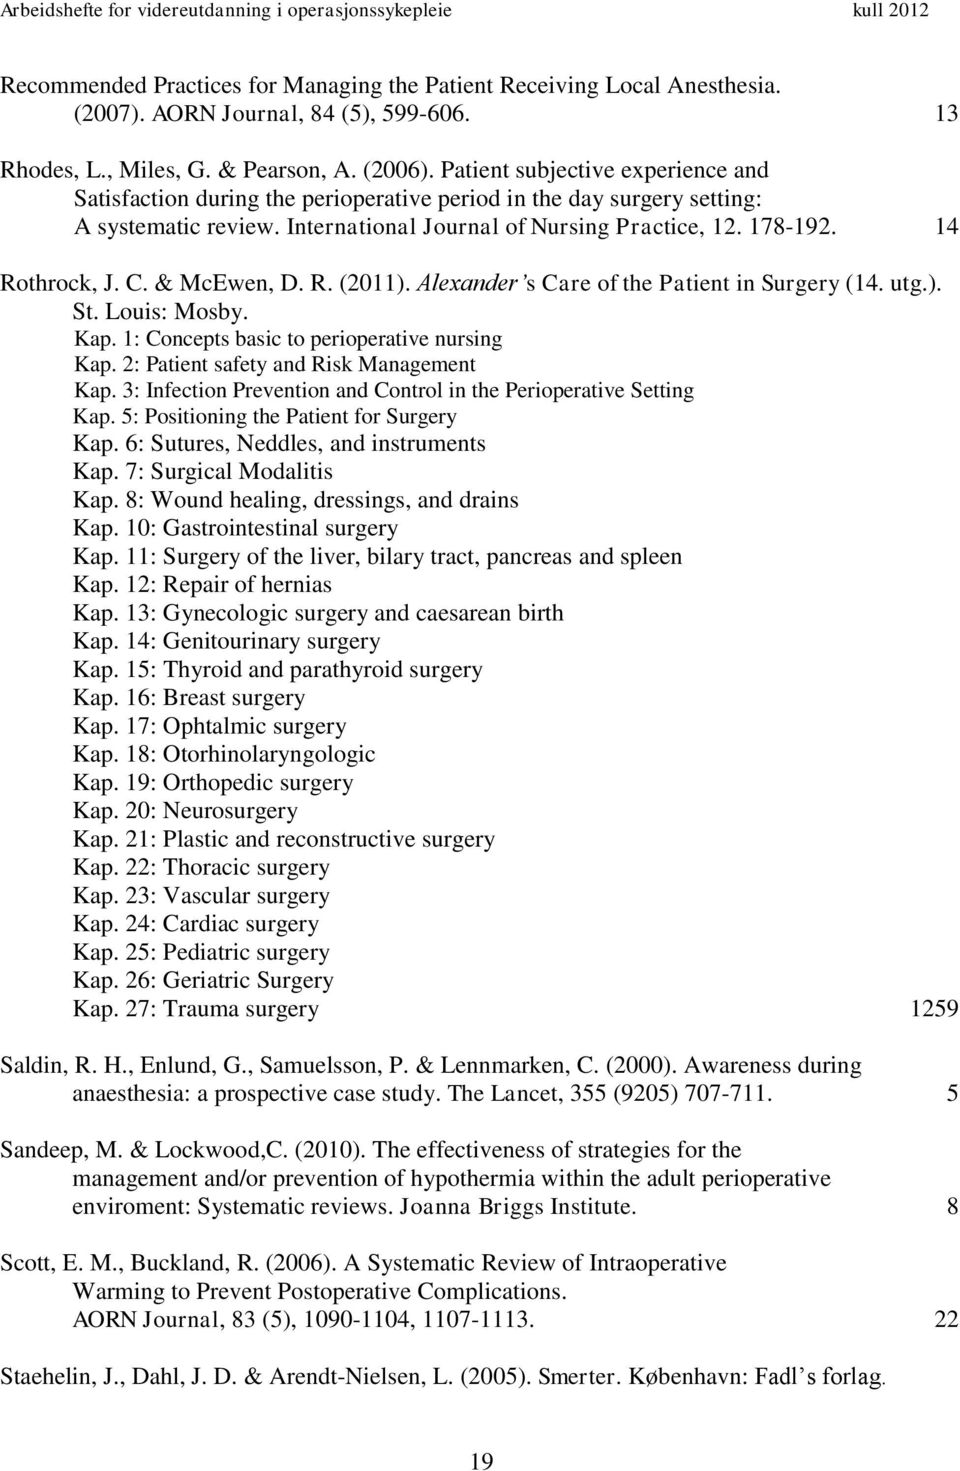 C. & McEwen, D. R. (2011). Alexander s Care of the Patient in Surgery (14. utg.). St. Louis: Mosby. Kap. 1: Concepts basic to perioperative nursing Kap. 2: Patient safety and Risk Management Kap.